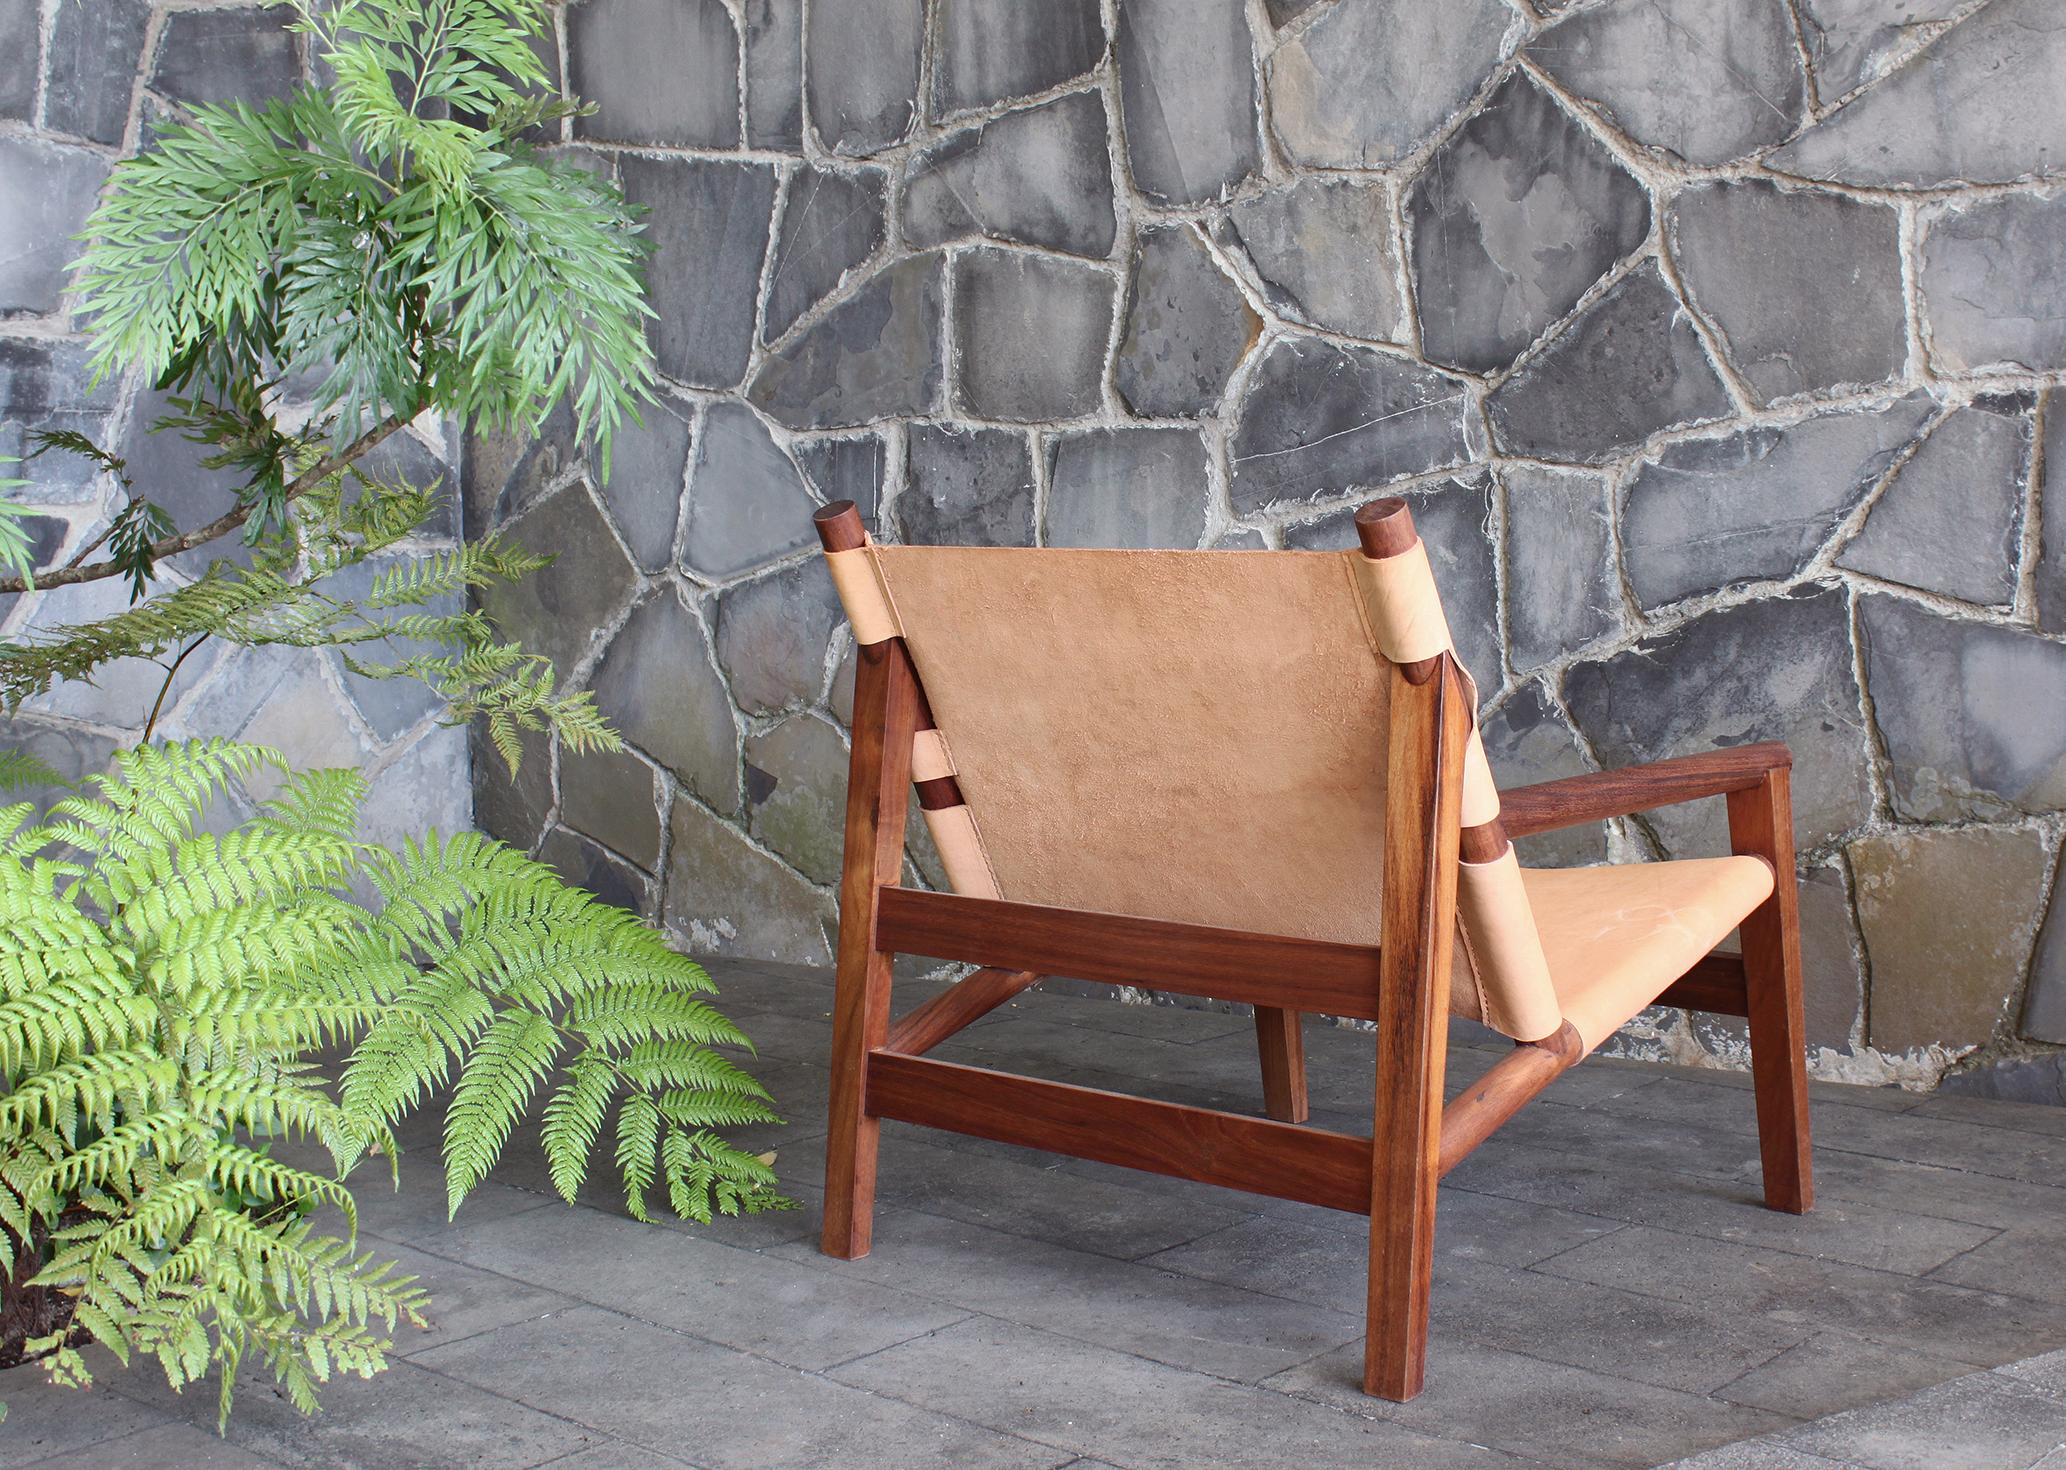 Modern La Colima Chair by Maria Beckmann, Represented by Tuleste Factory